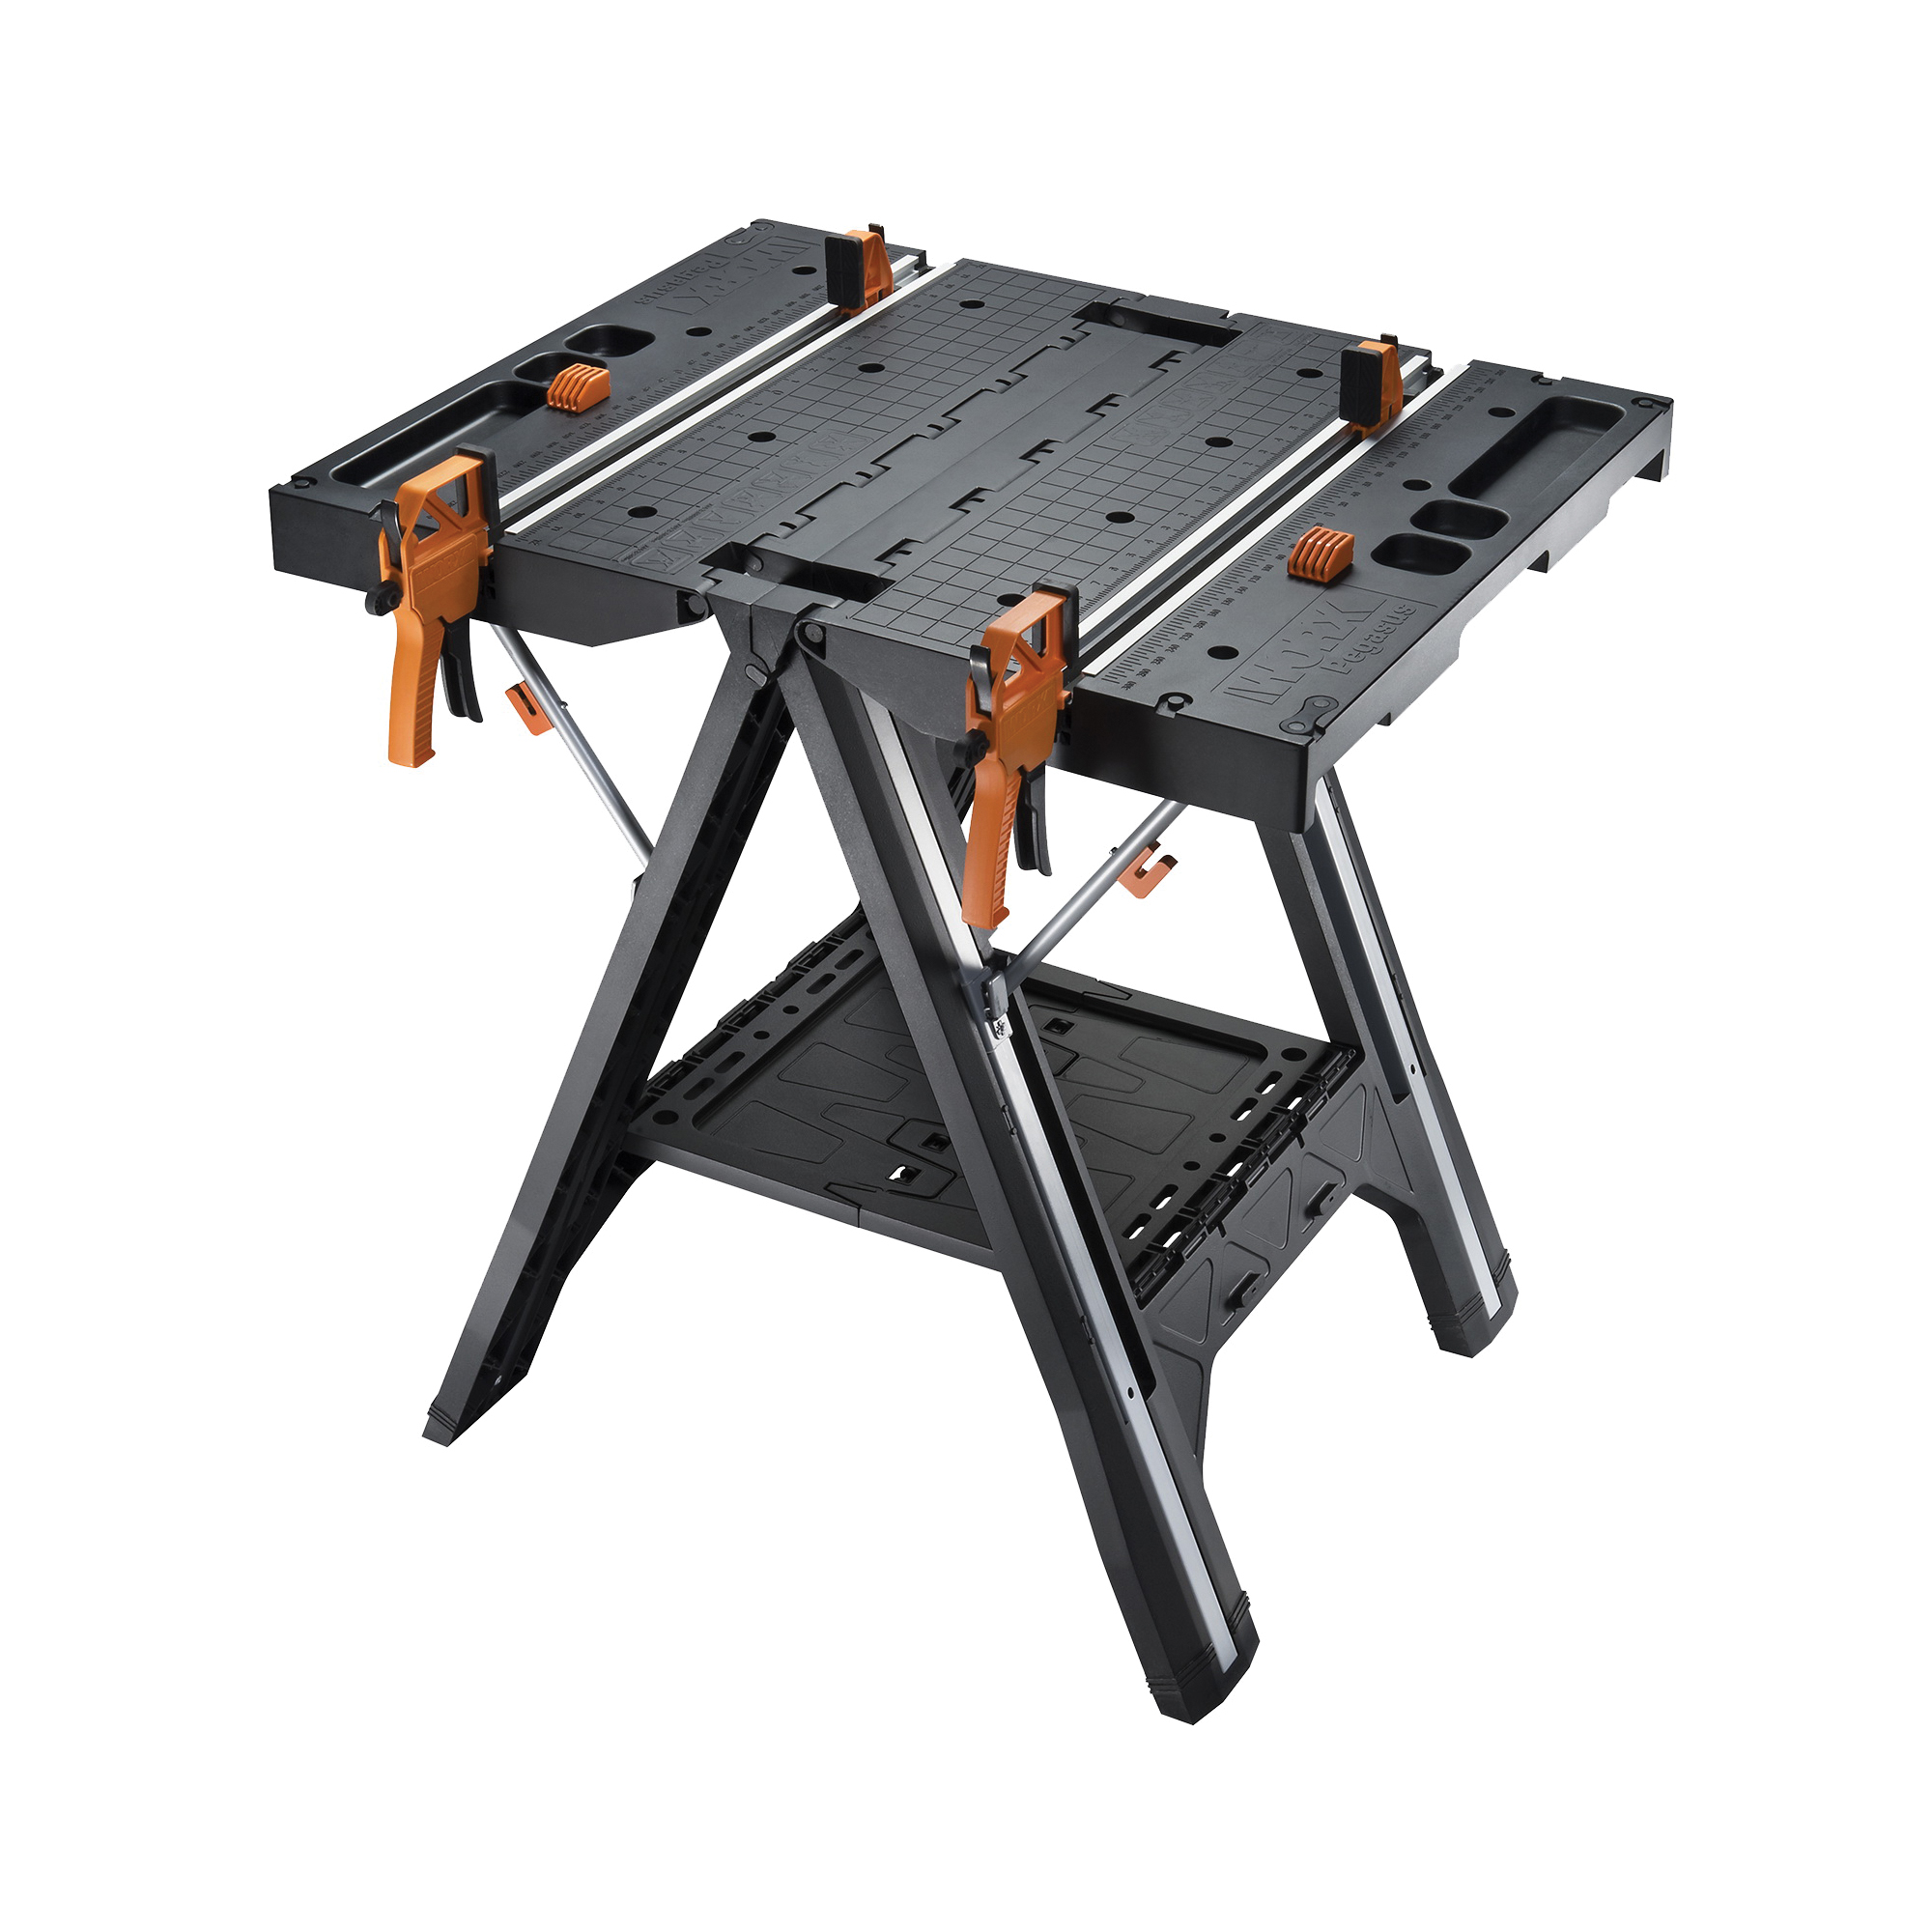 WX051 Folding Work Table with Quick Clamps, 25 in OAW, 31 in OAH, 300 lb Capacity, Plastic Tabletop